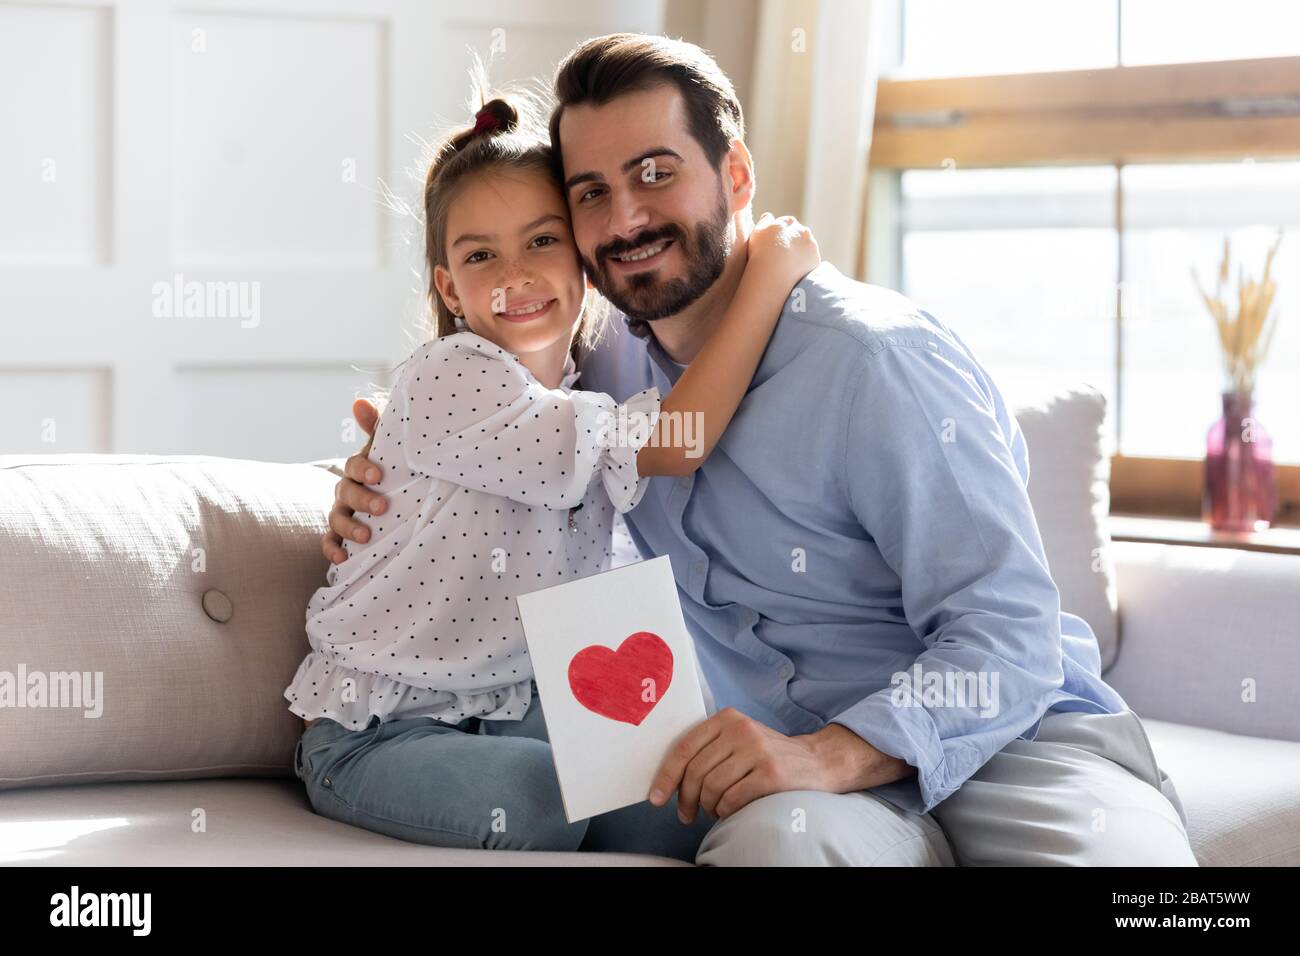 Portrait of cute little girl embracing smiling father, birthday congratulations. Stock Photo